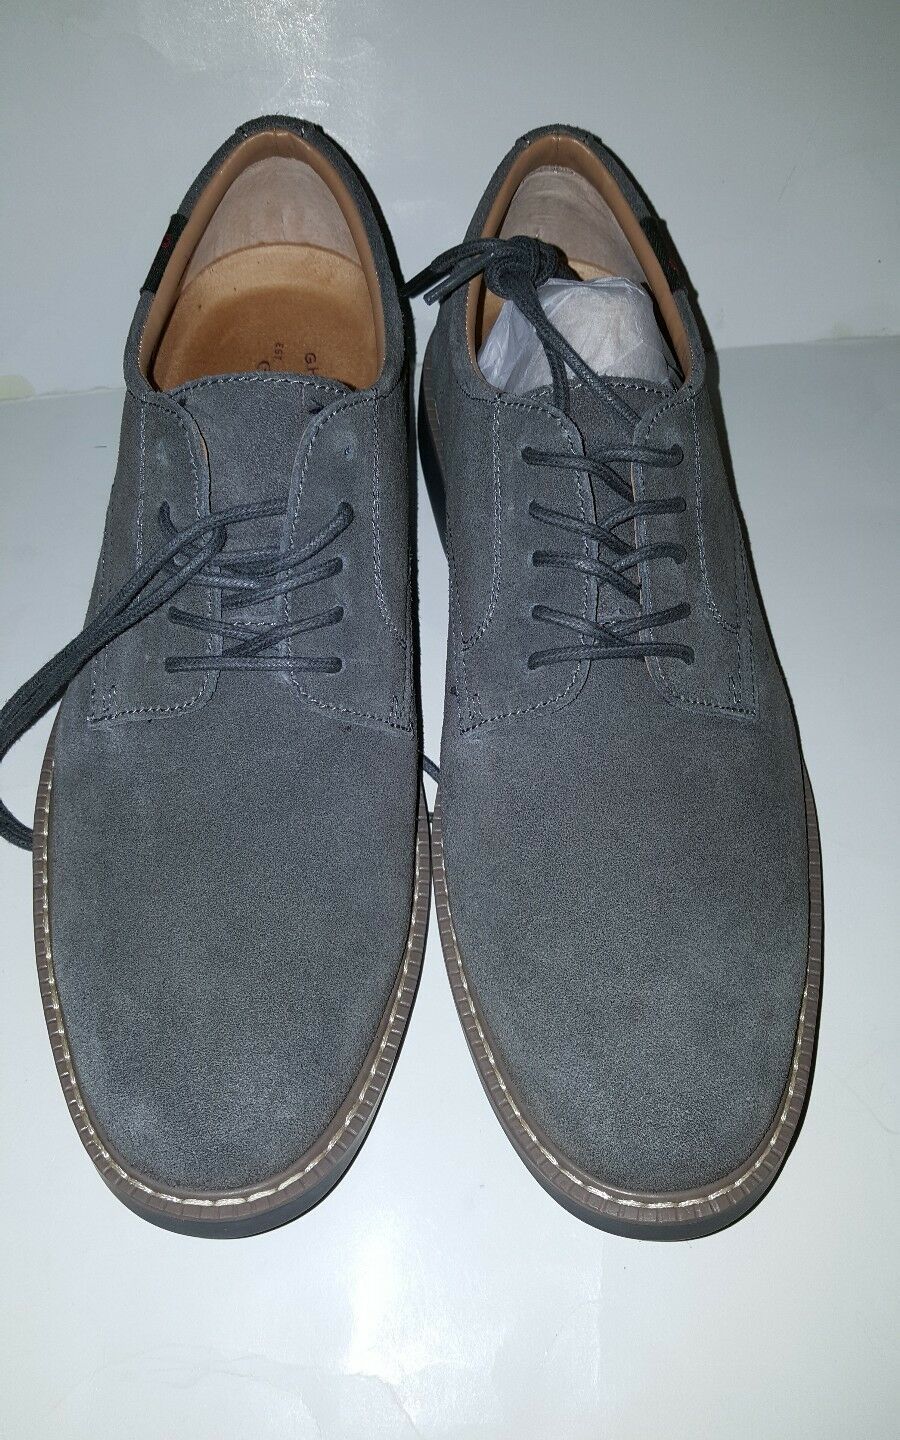 GH BASS PASADENA MEN'S OXFORD SHOES; LEATHER/ SUEDE/ GREY/00261915010 ...